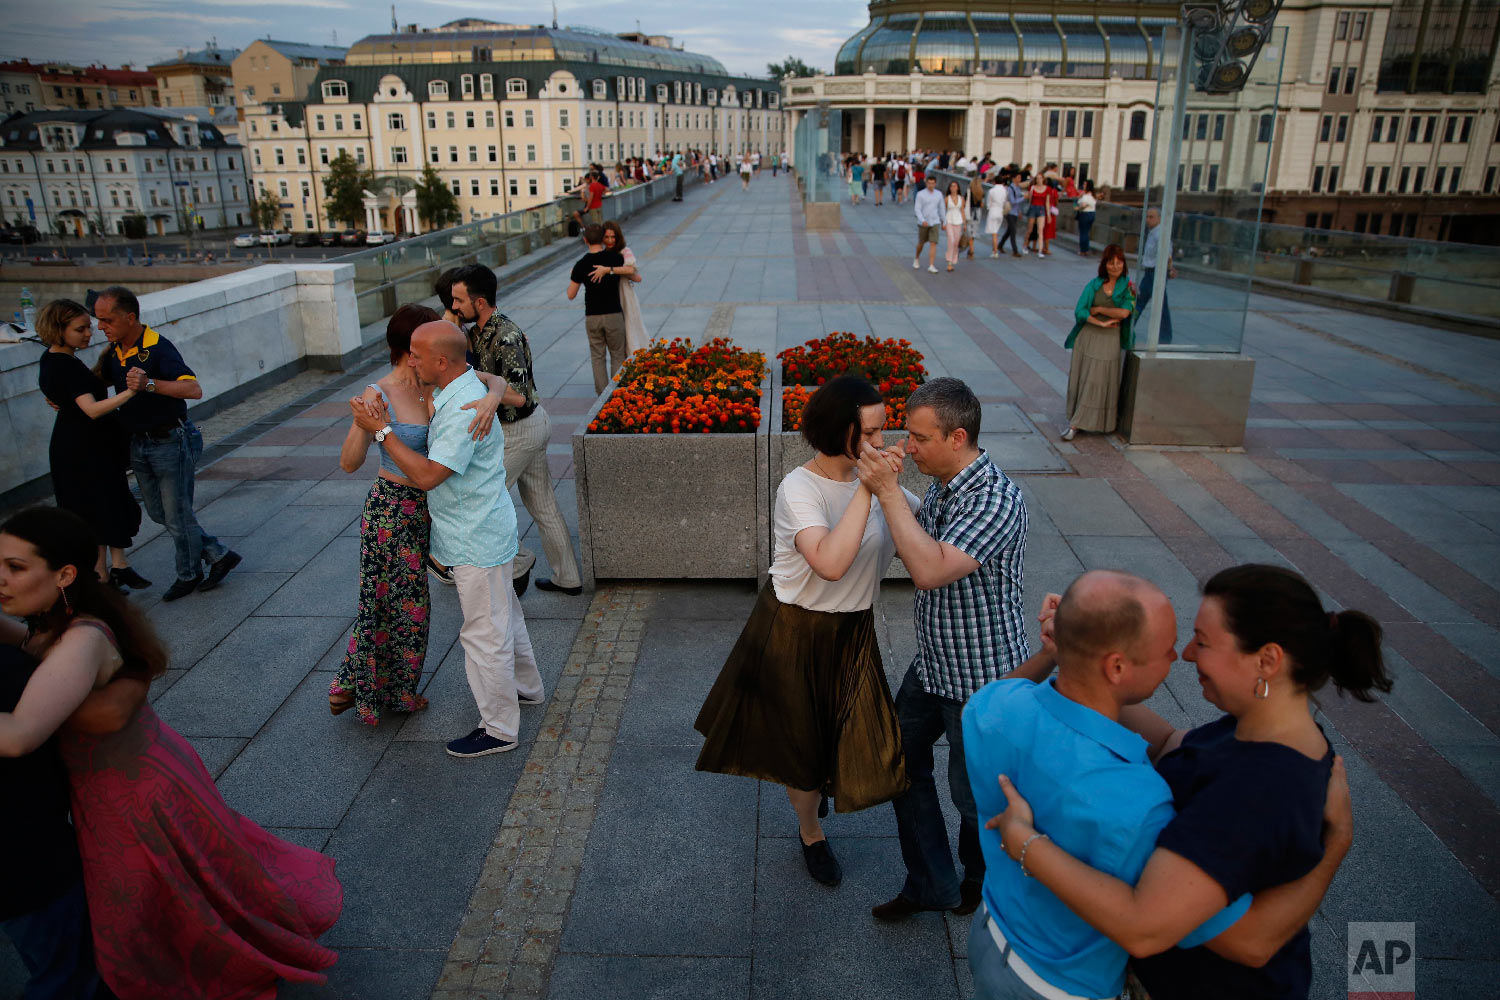  Couples dance the tango on Patriarshy Bridge during the 2018 soccer World Cup in Moscow, Russia on June 29, 2018. (AP Photo/Rebecca Blackwell) 